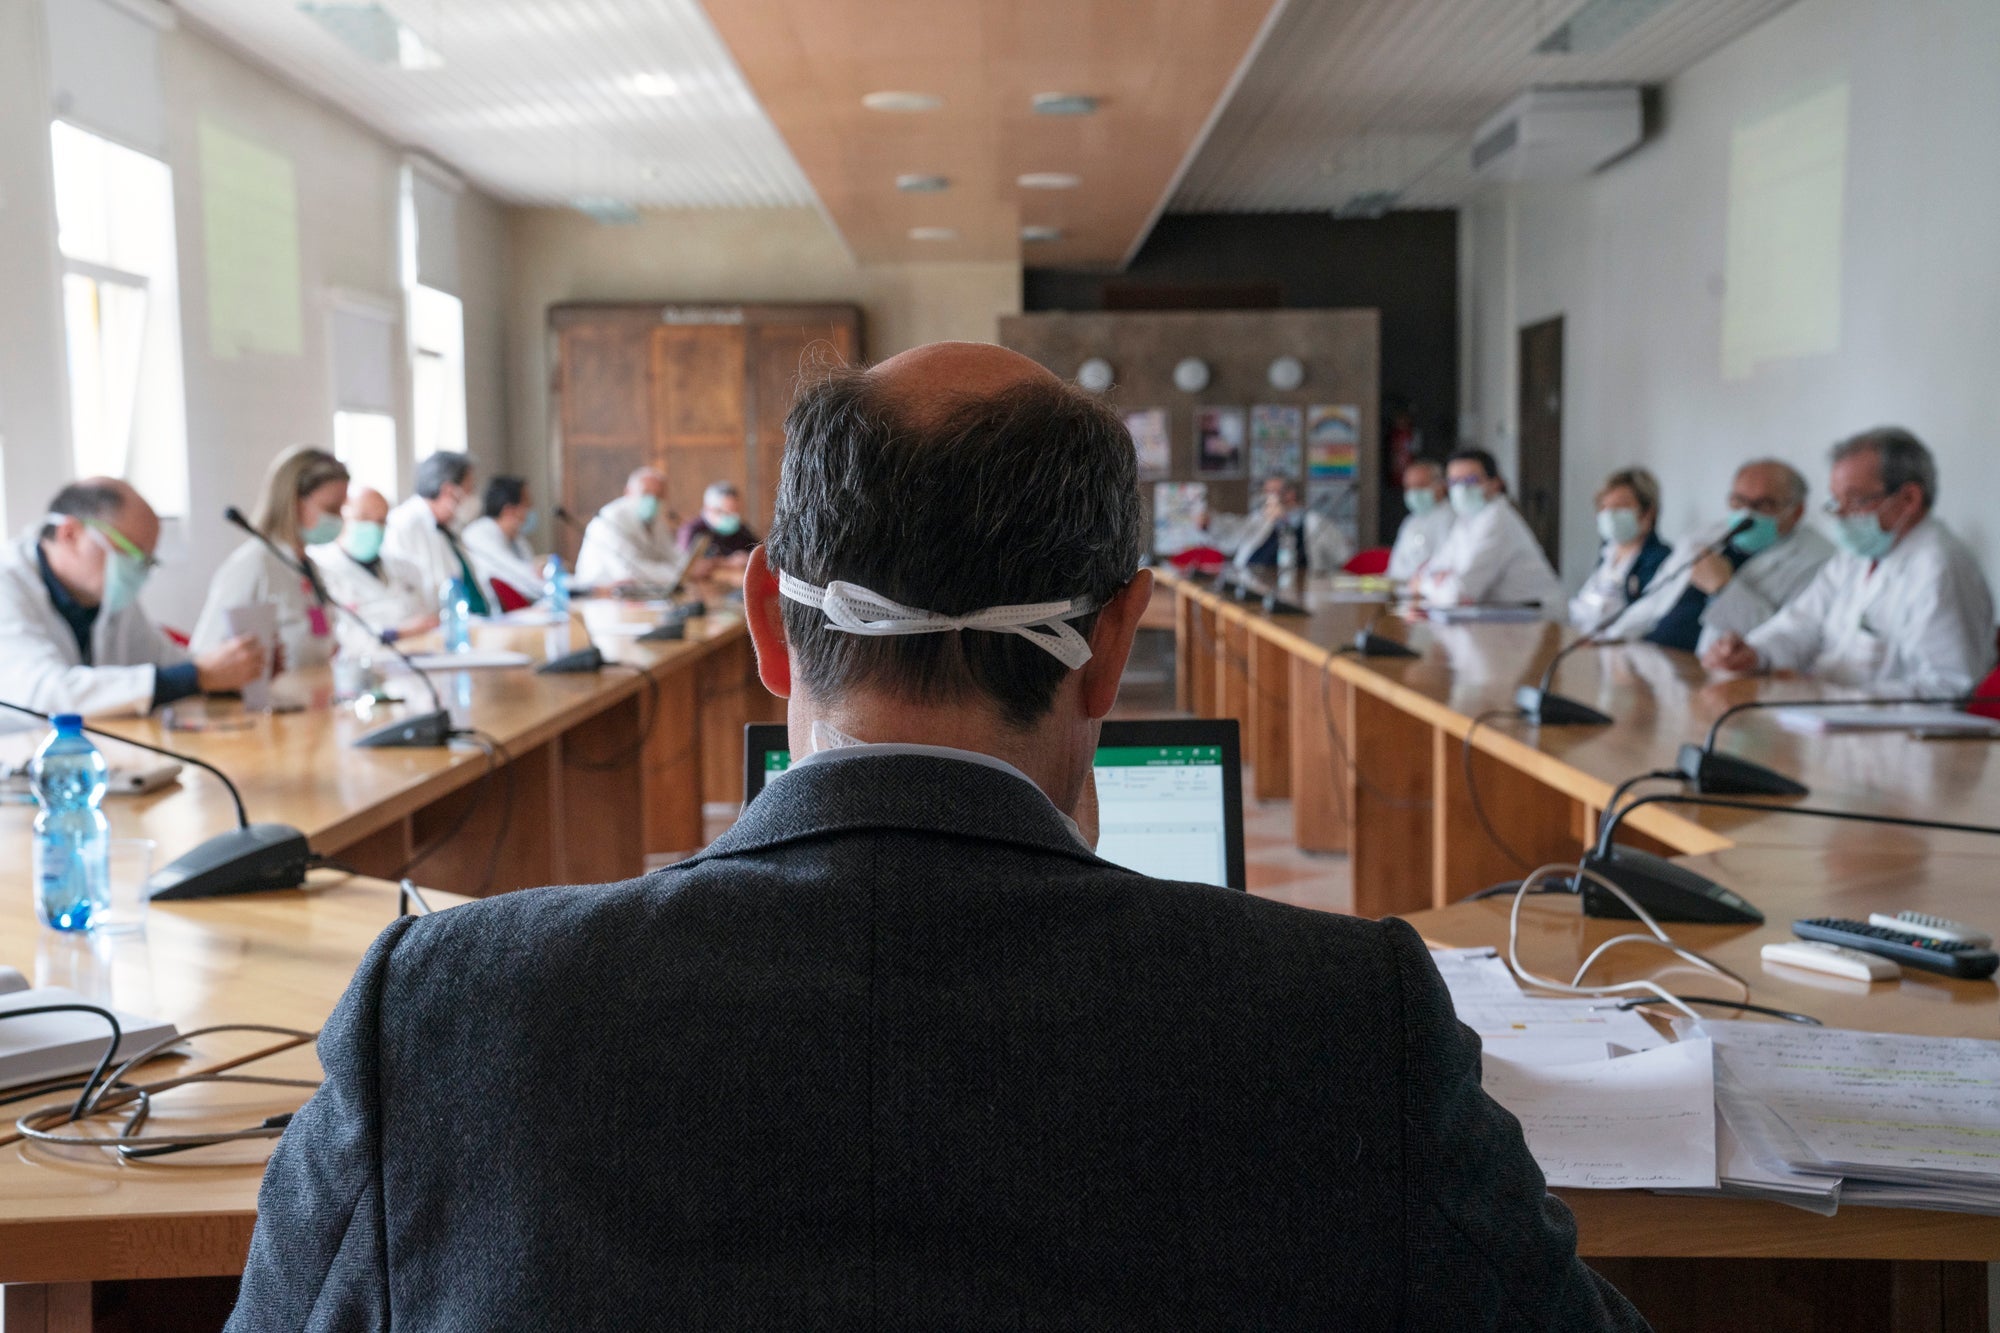 A man in a suit wearing a surgical mask briefs a conference room full of masked doctors.